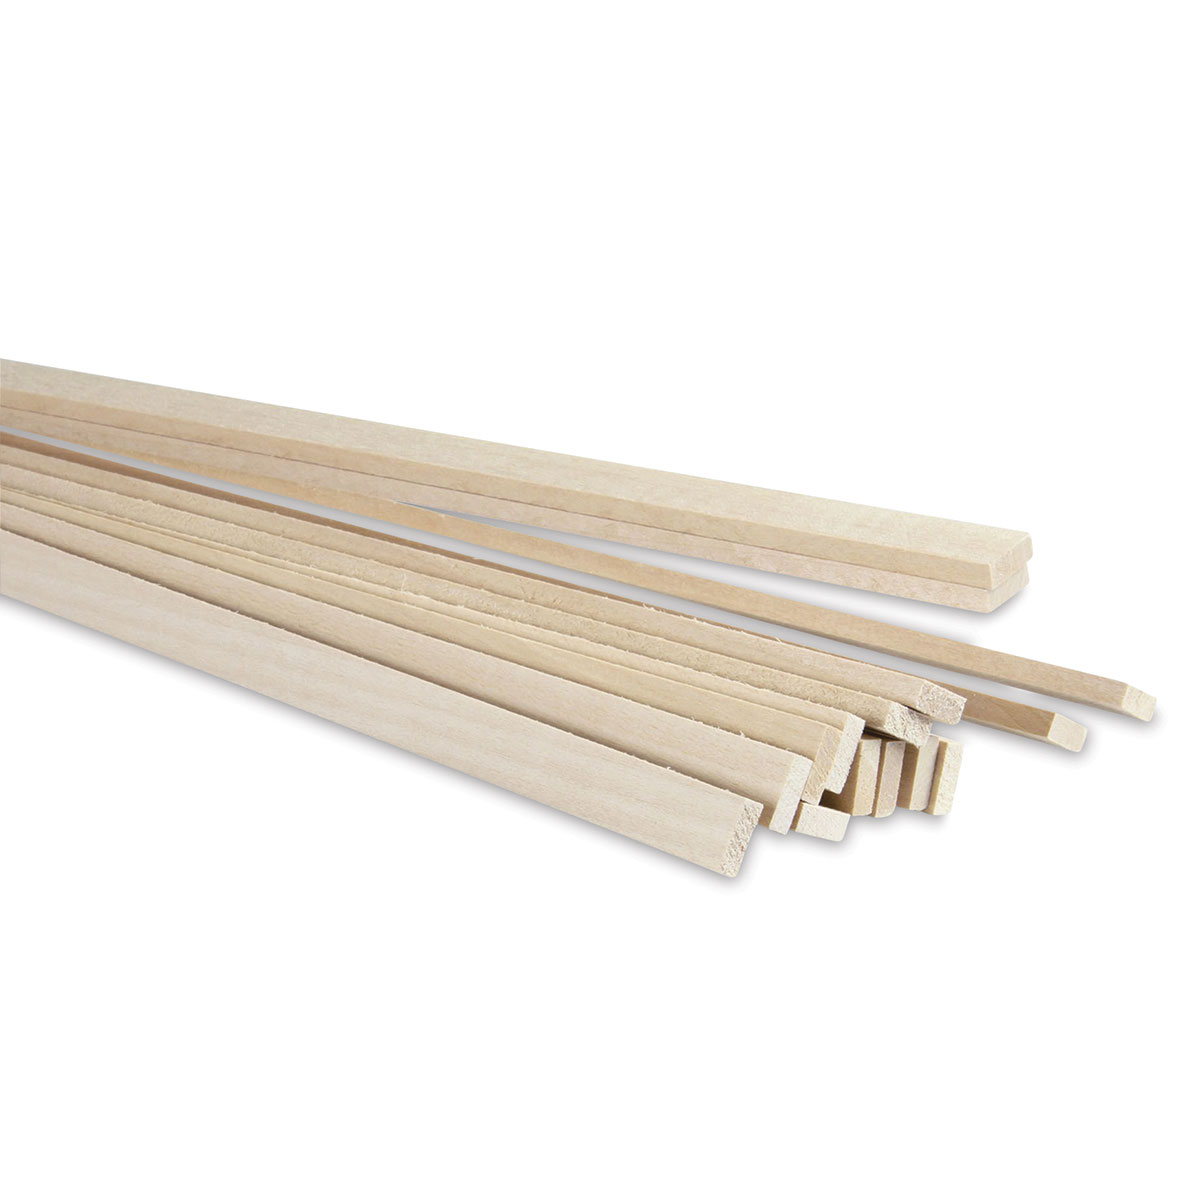 Midwest Products Basswood Strips - 15 Pieces, 1/8 x 1/2 x24